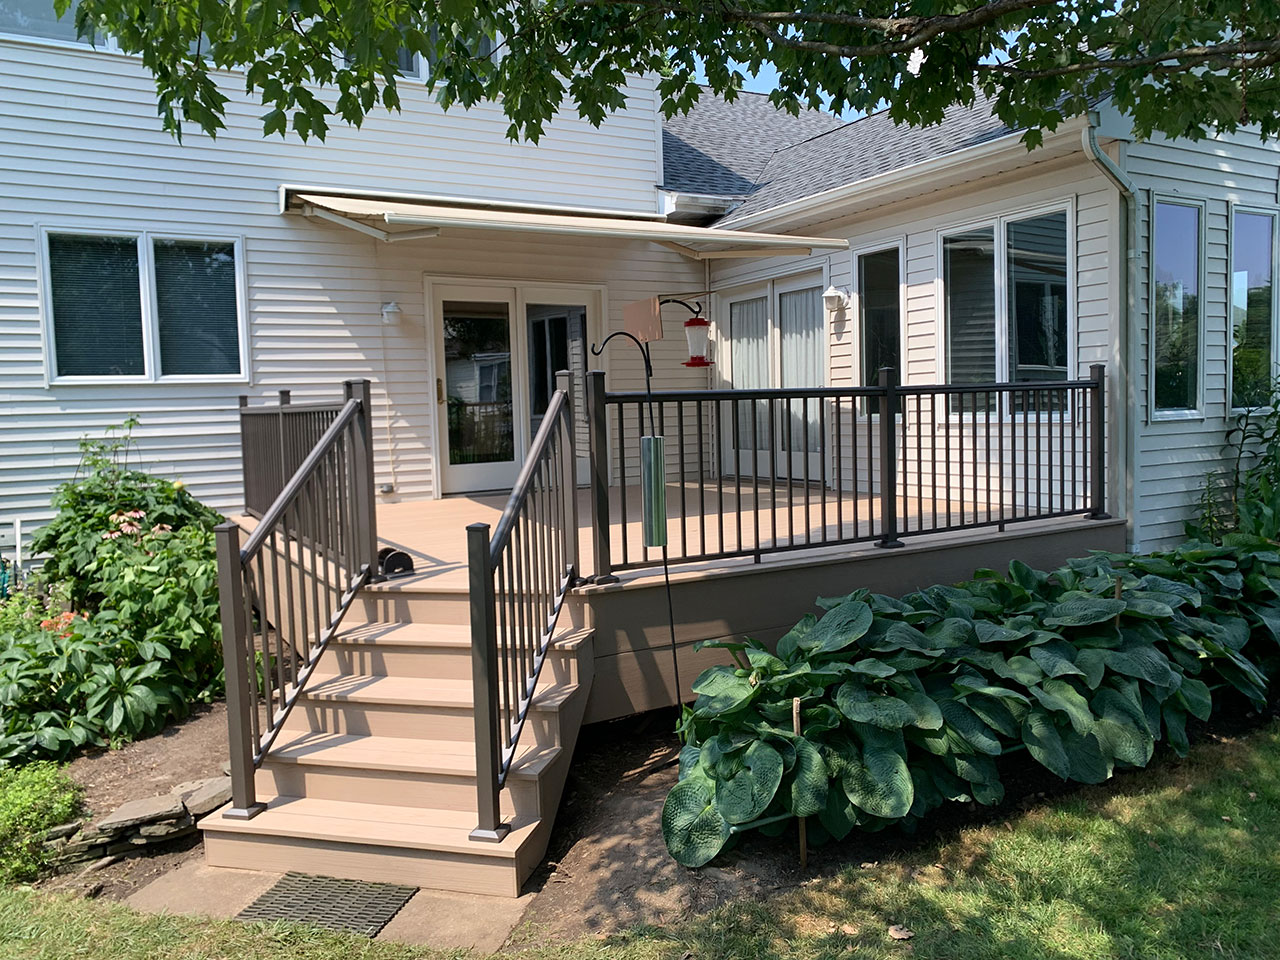 Morrestown Azek Deck Harvest collection with RDI Bronze Railing - After